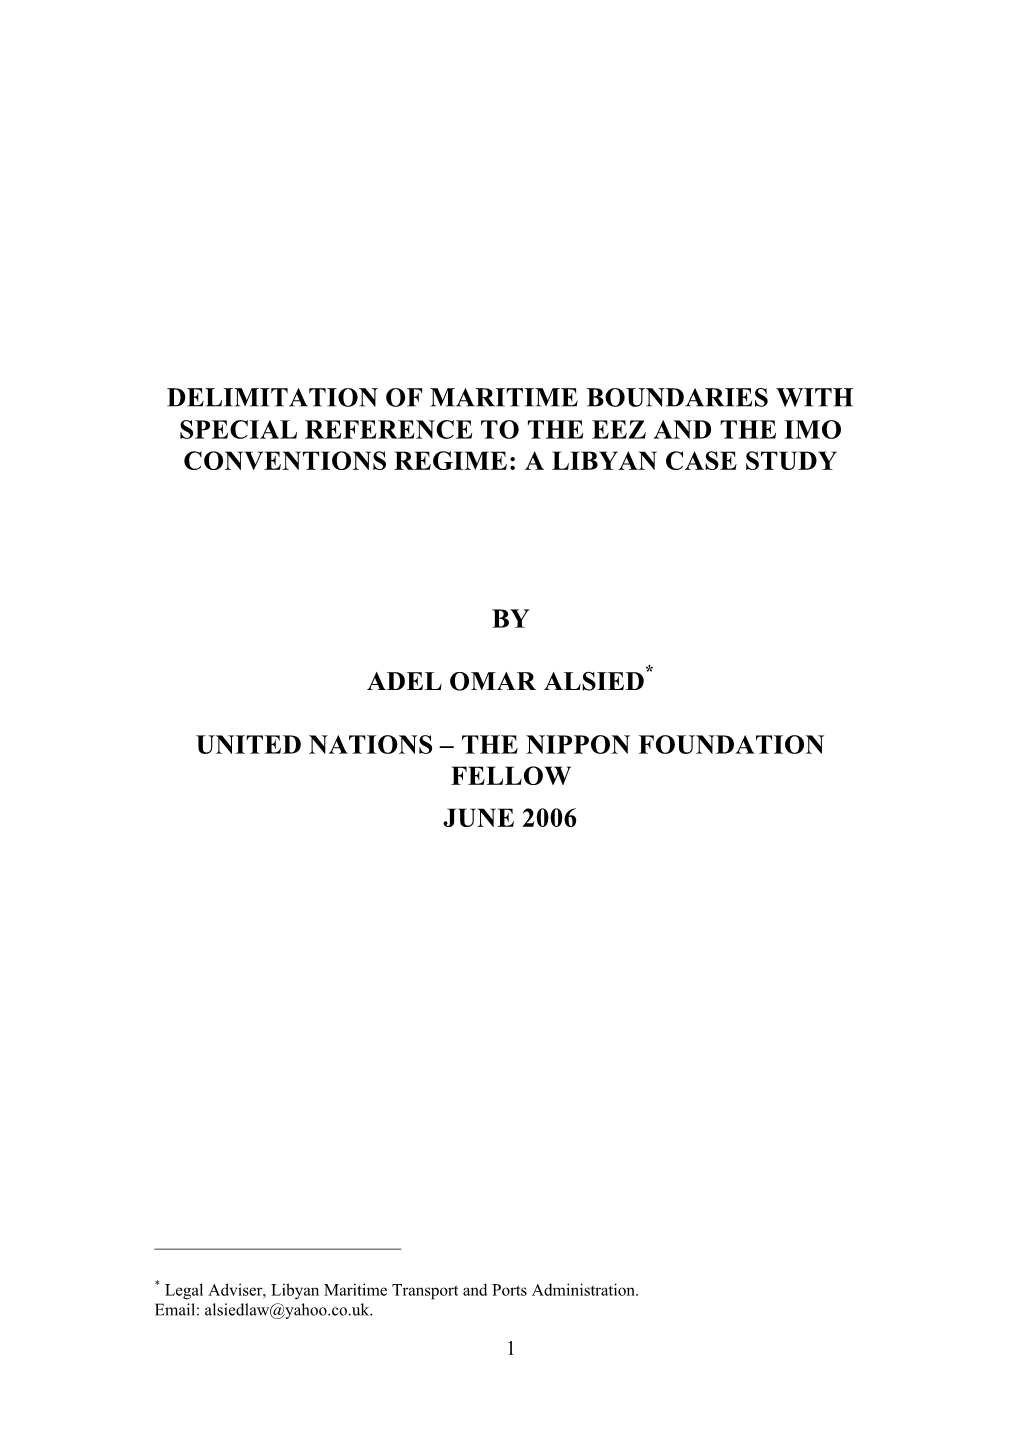 Delimitation of Maritime Boundaries with Special Reference to the Eez and the Imo Conventions Regime: a Libyan Case Study